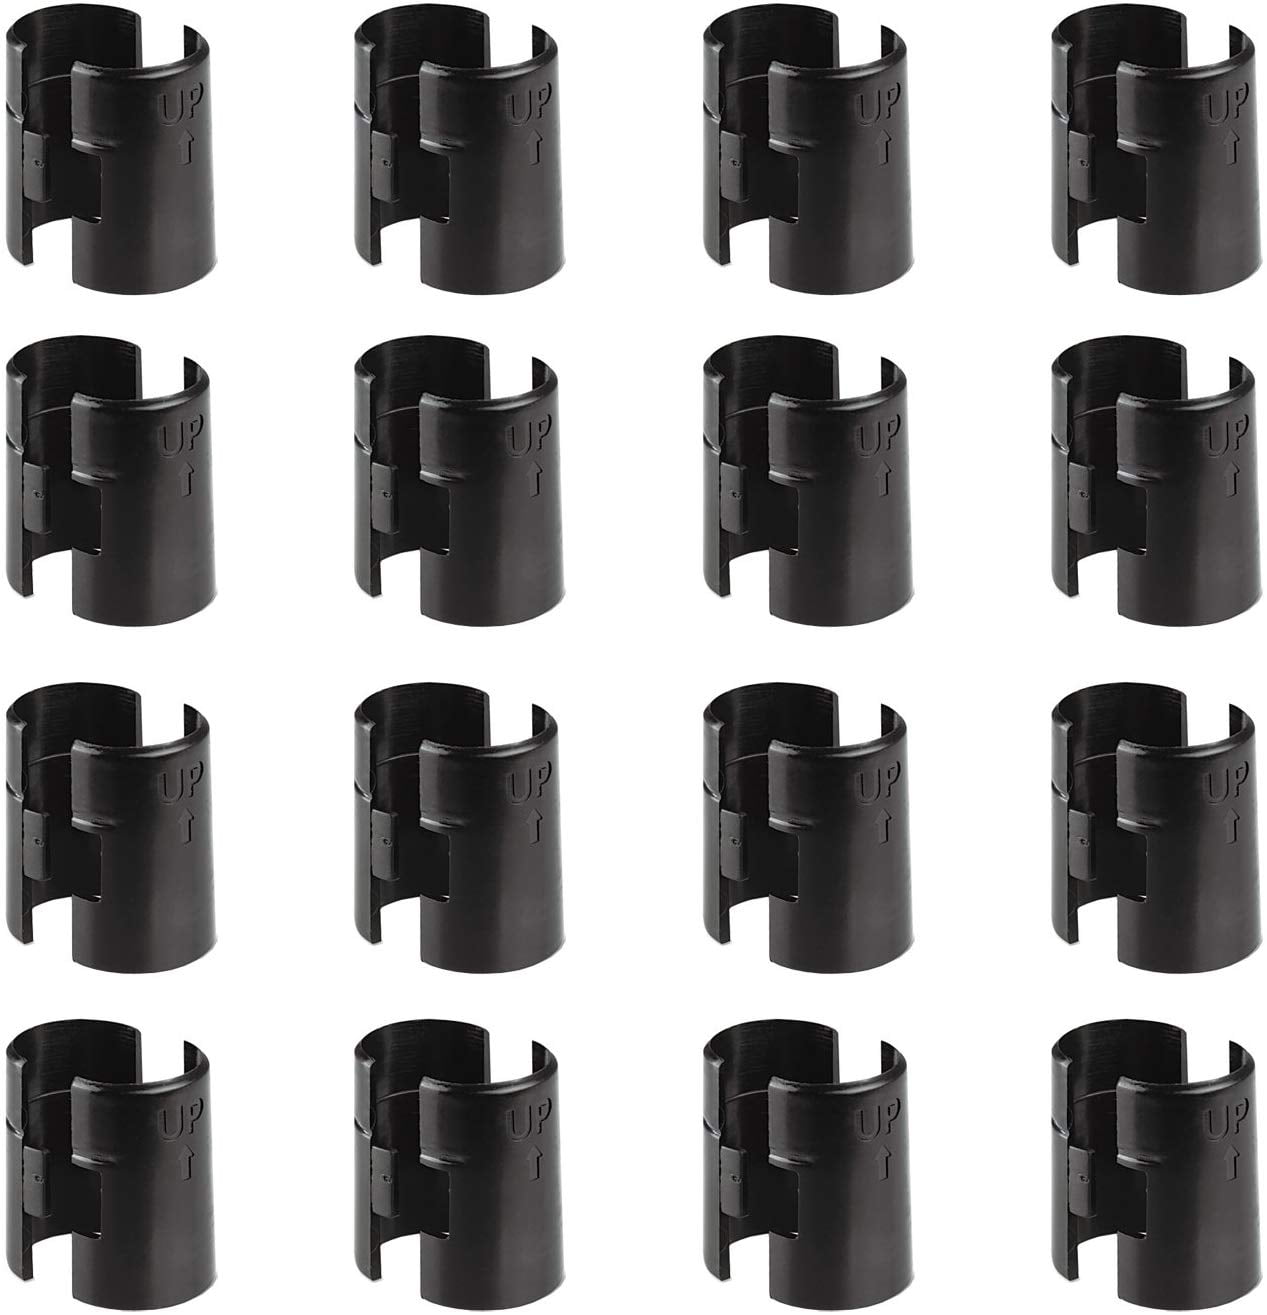 74-Packs Wire Shelf Clips Wire Shelving Shelf Lock Clips for 1 Inch Post-S V8Y1 